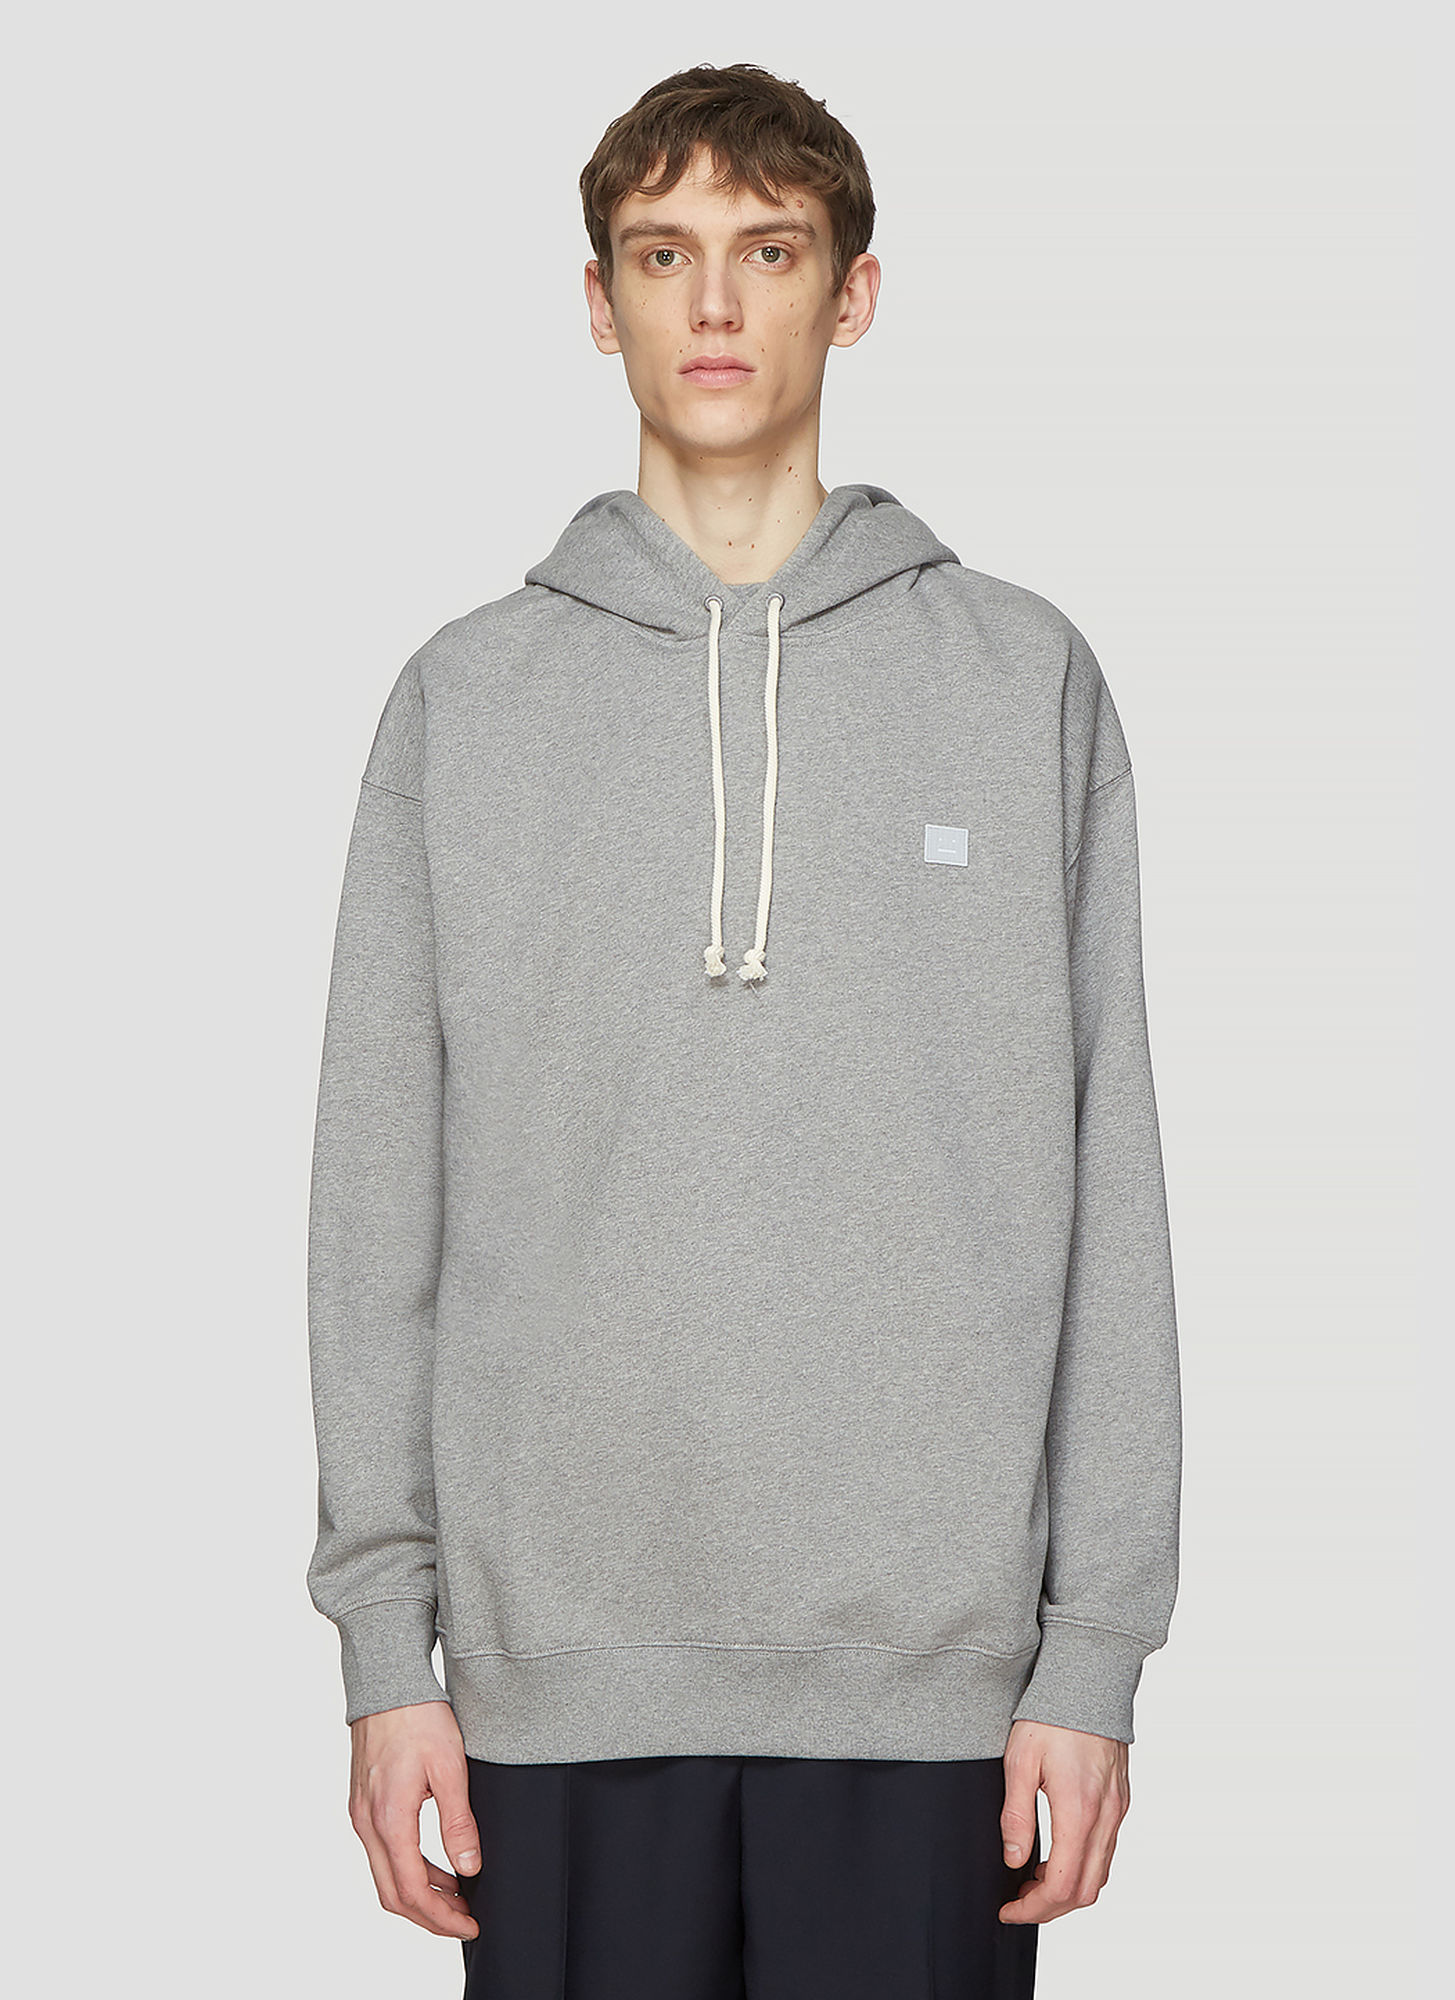 Acne Studios Hooded Oversized Face Patch Sweatshirt in Grey size S ...